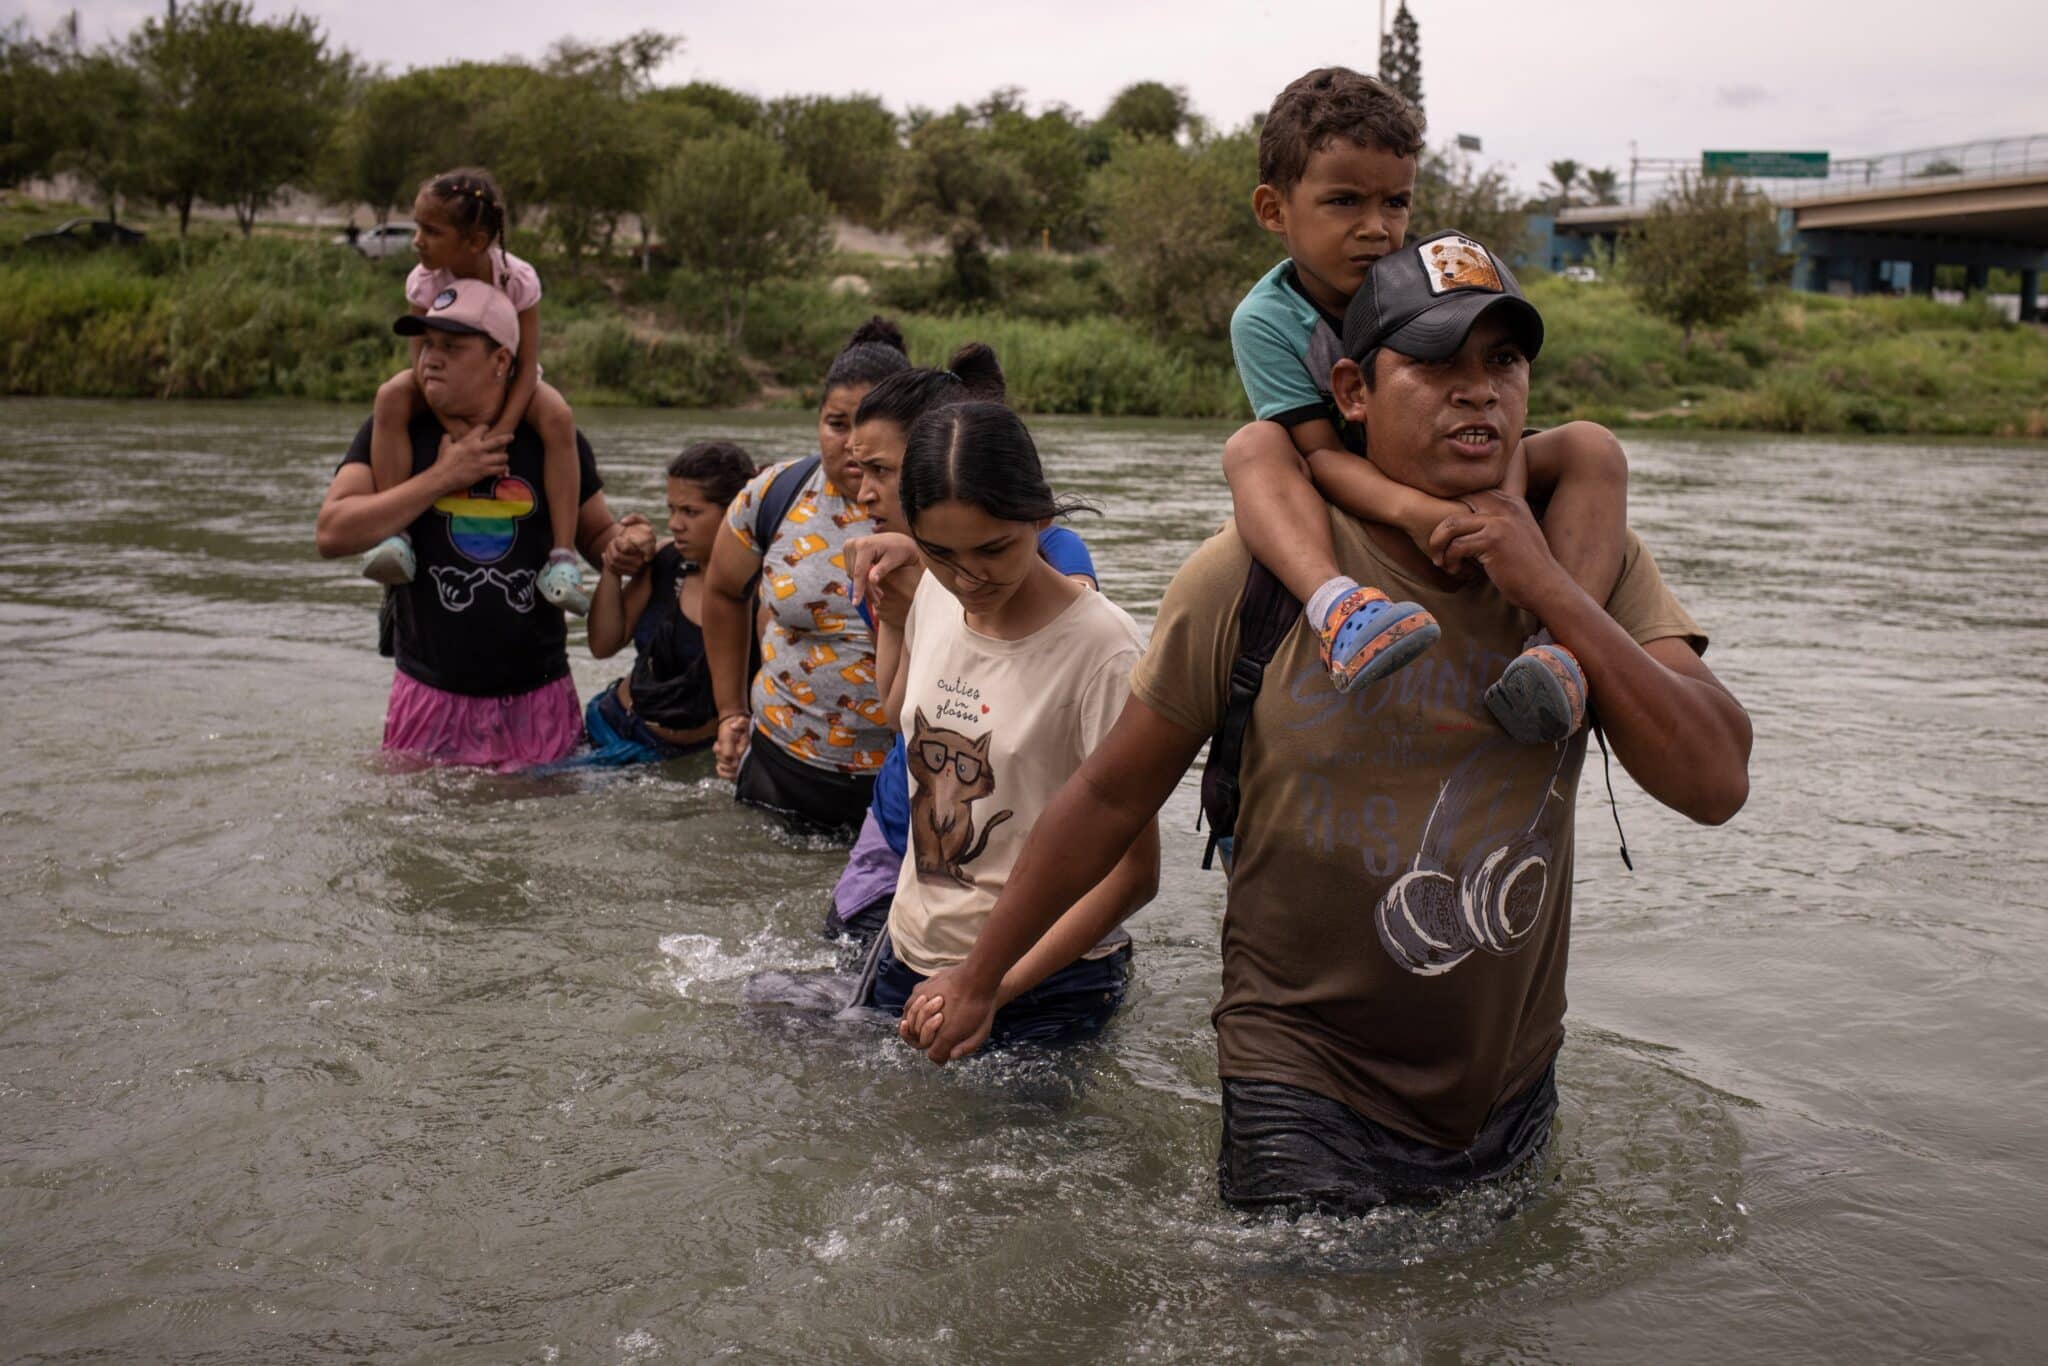 Orlando, a migrant from Ecuador, carries four-year-old Peter as they wade through the Rio Grande from Mexico into Eagle Pass, Texas, Oct. 6, 2023. (OSV News photo/Adrees Latif, Reuters)